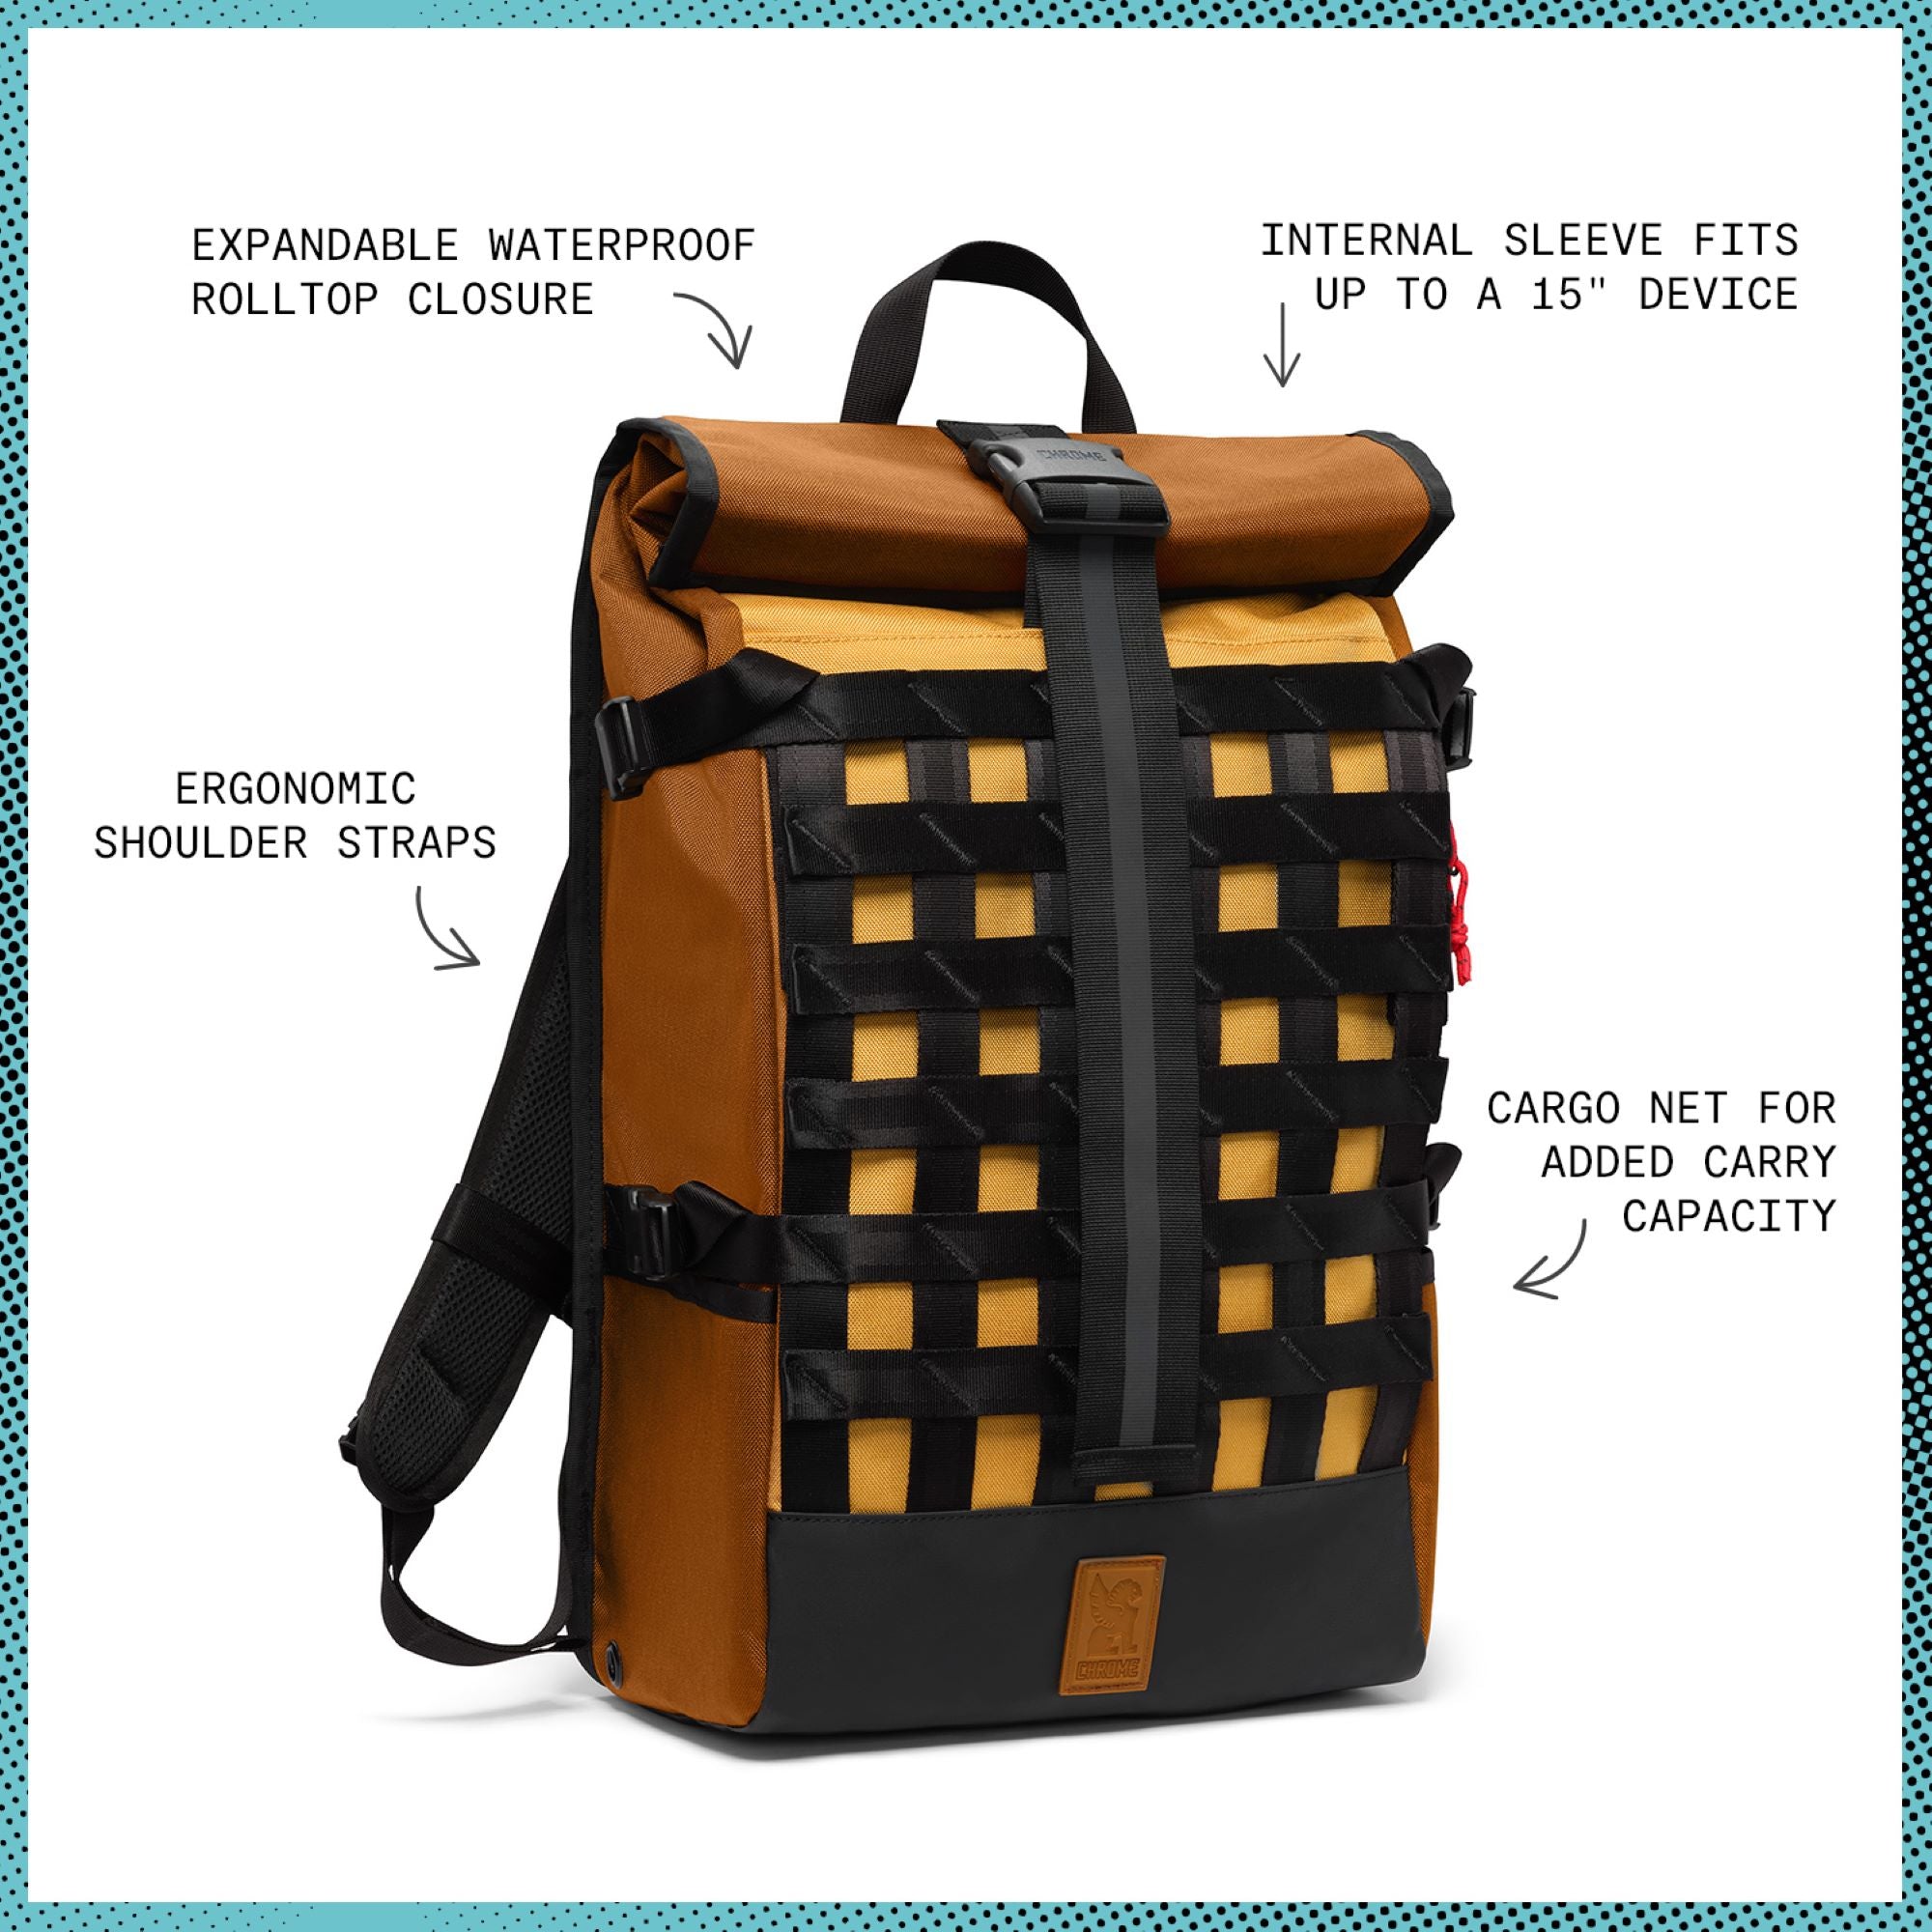 Barrage Cargo Backpack features